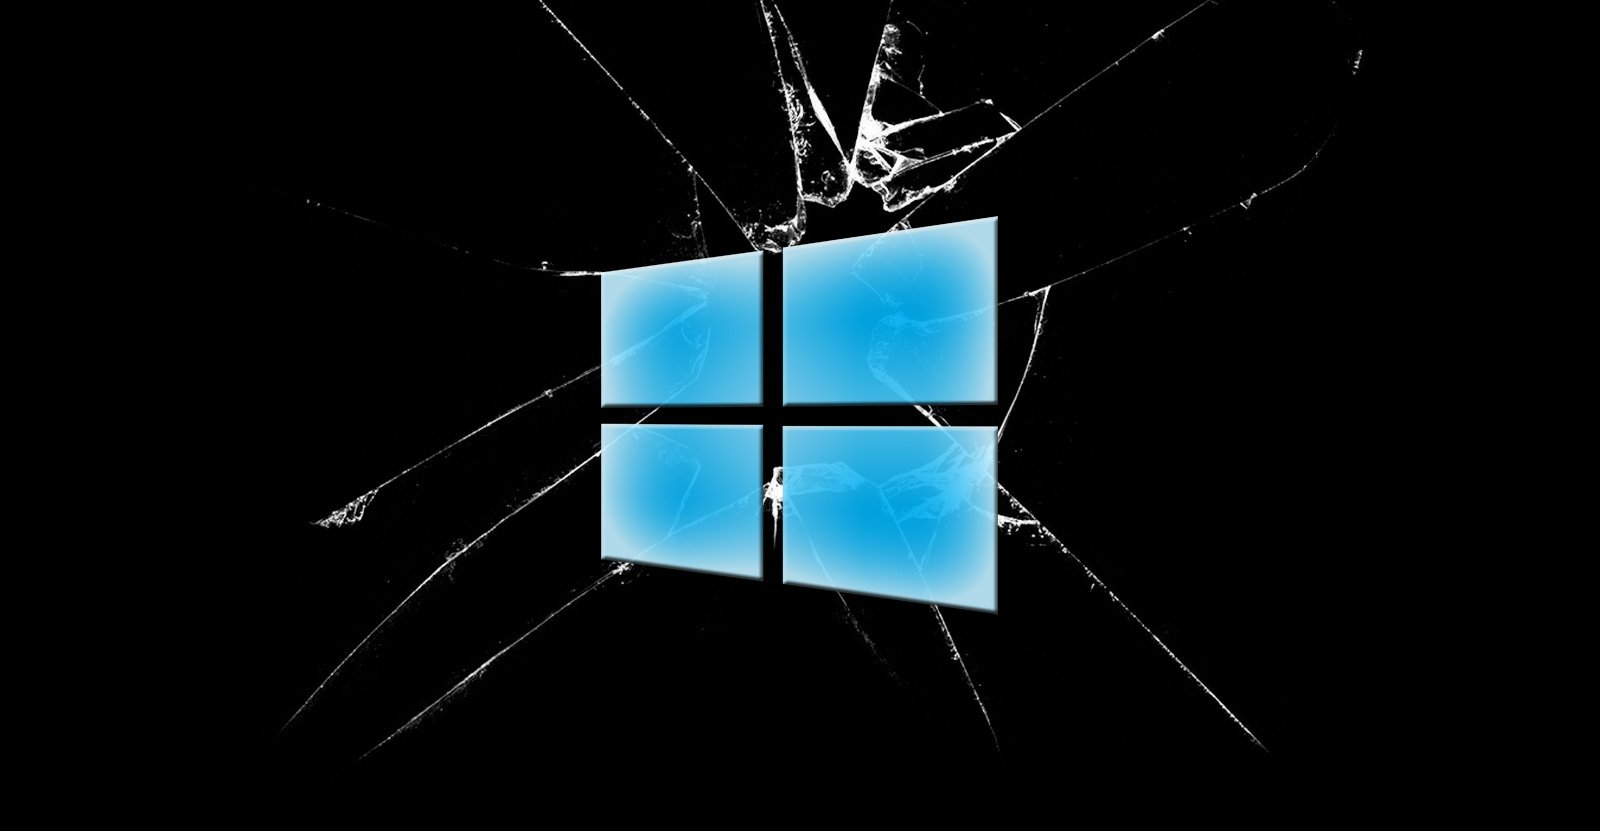 Resetting Windows devices might not wipe all data